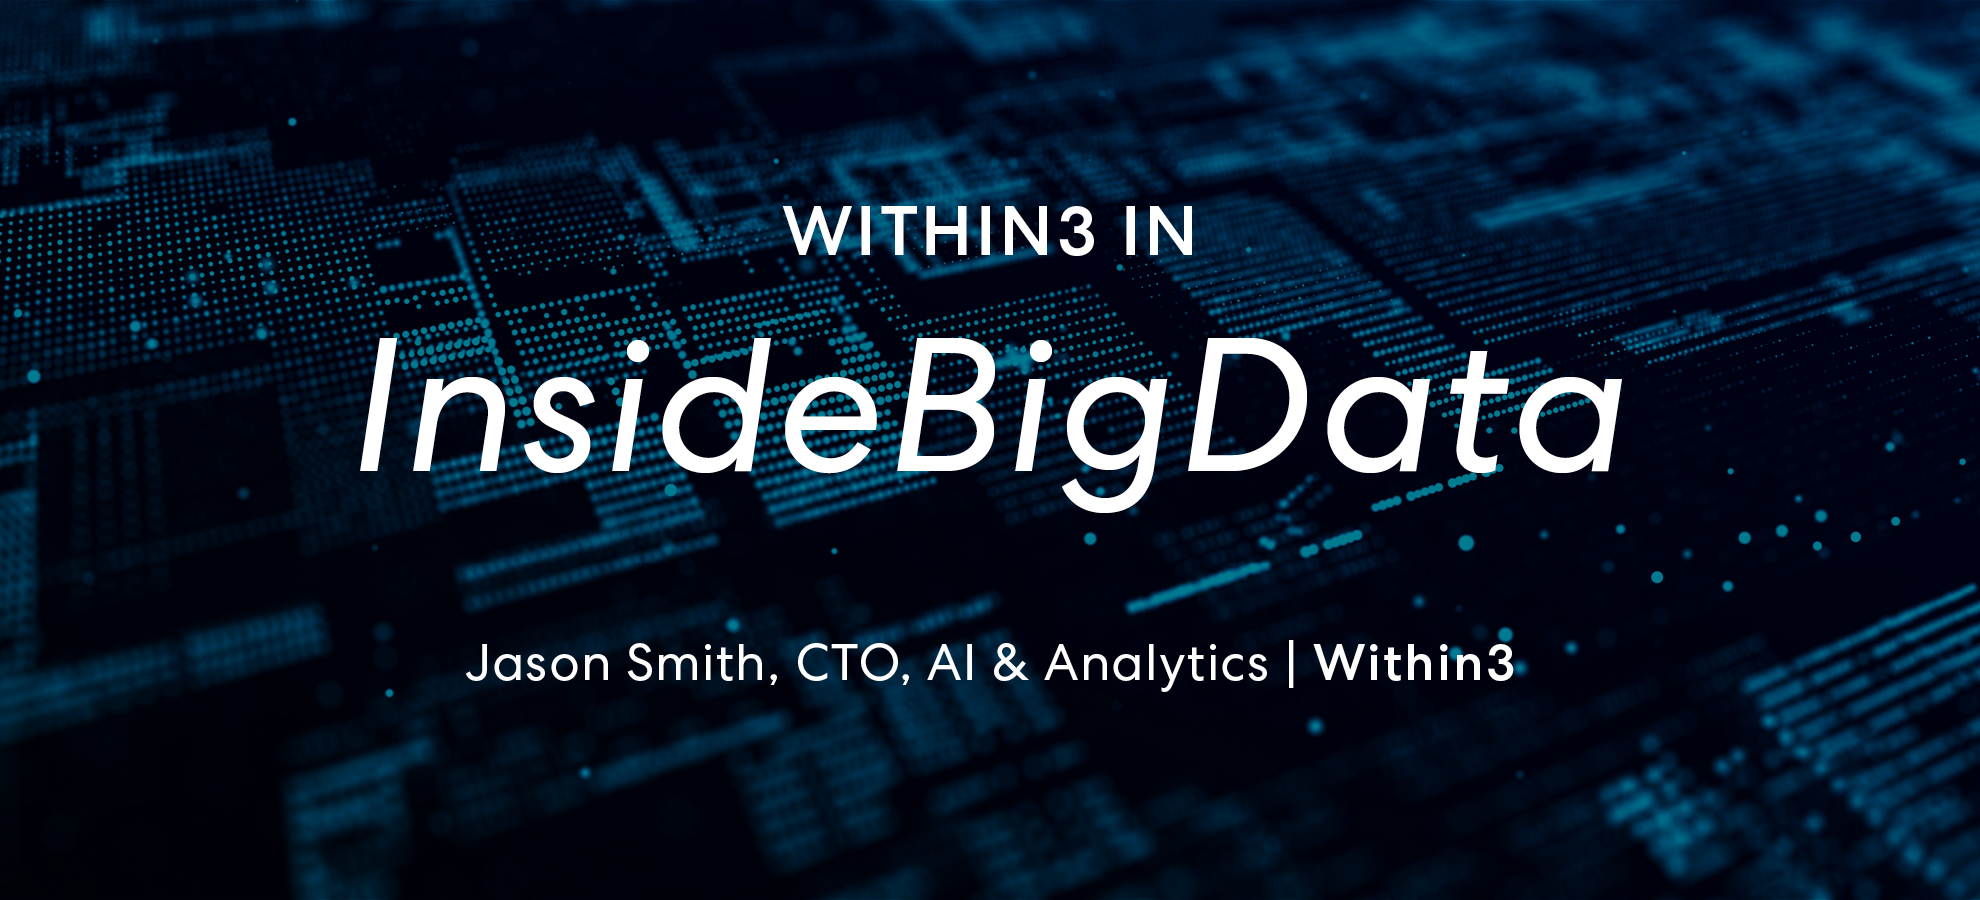 Within3 in InsideBigData: AI needs quality data to succeed